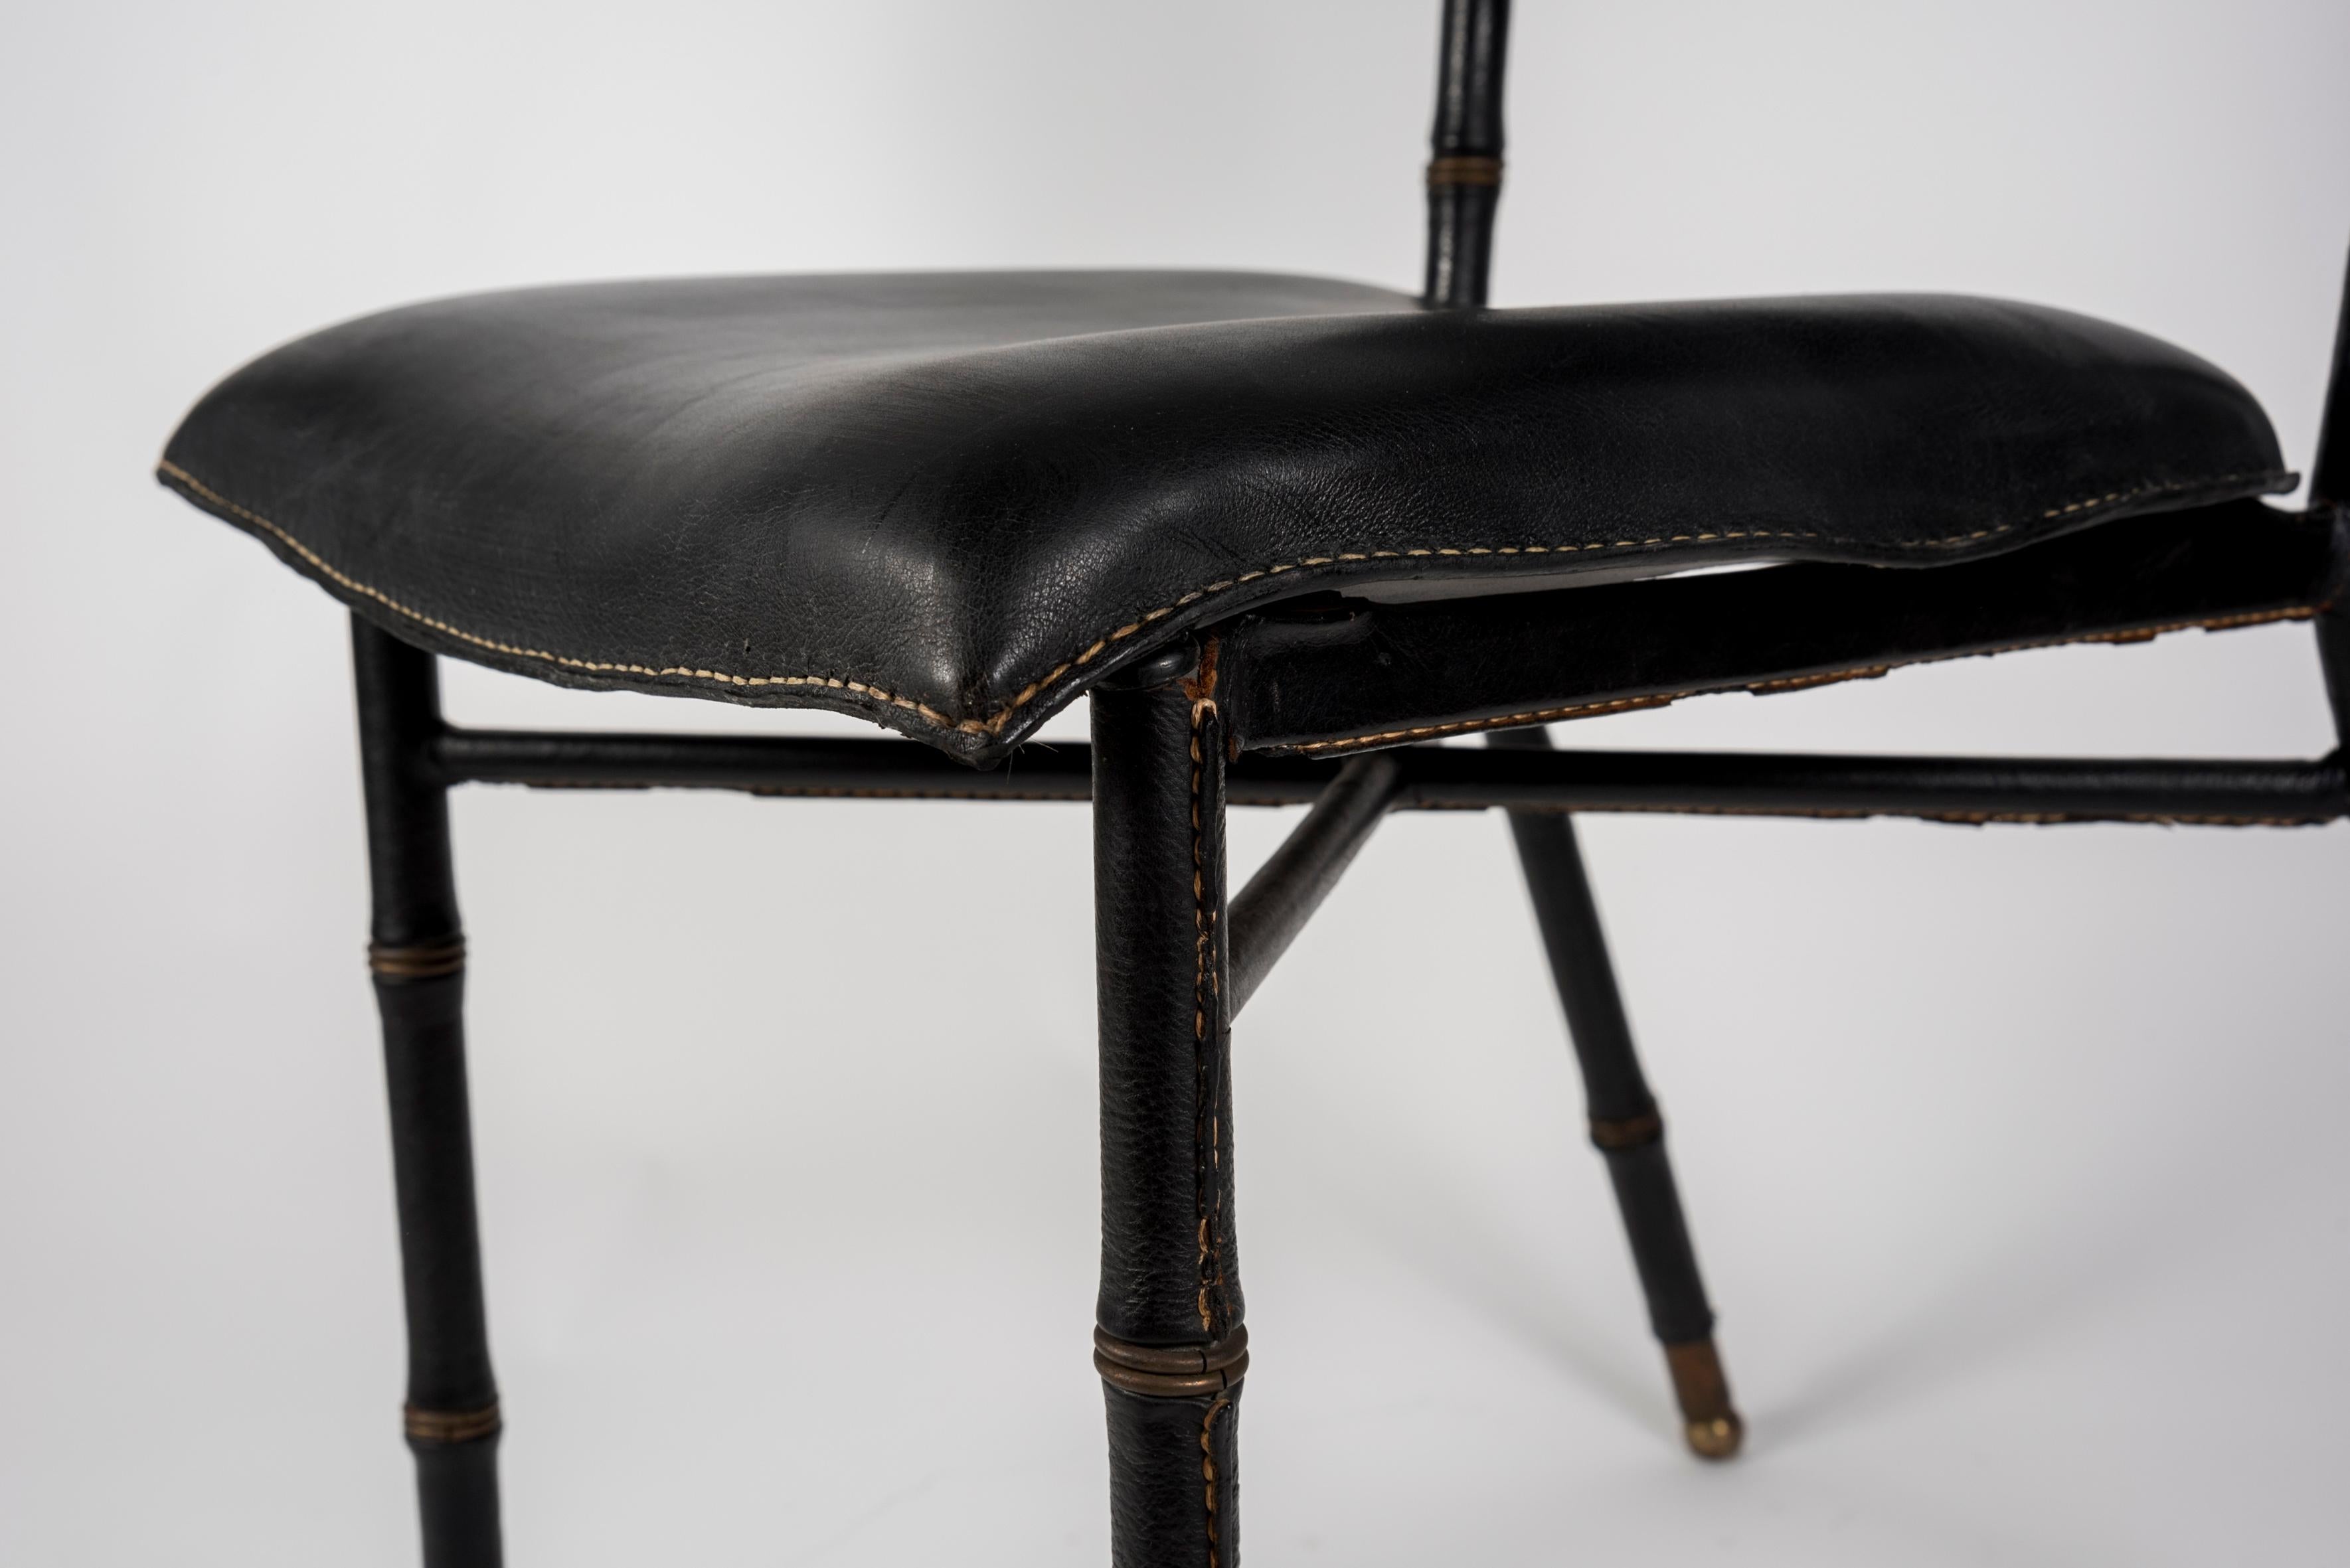 jacques adnet chair